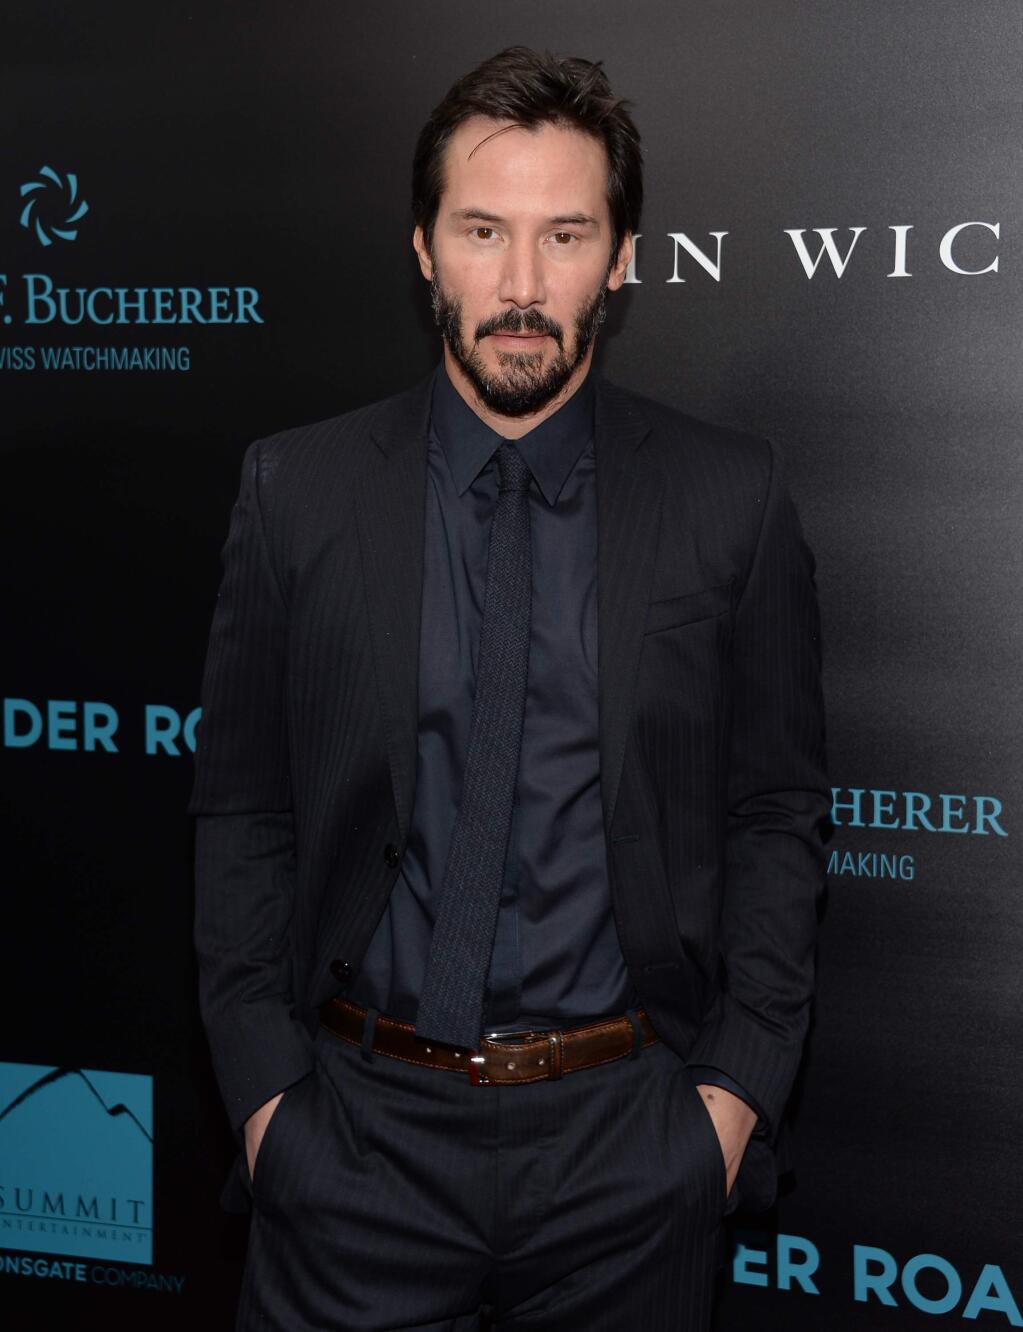 Actor Keanu Reeves attends a special screening of 'John Wick' at the Regal Union Square on Monday, Oct. 13, 2014, in New York. (Photo by Evan Agostini/Invision/AP)